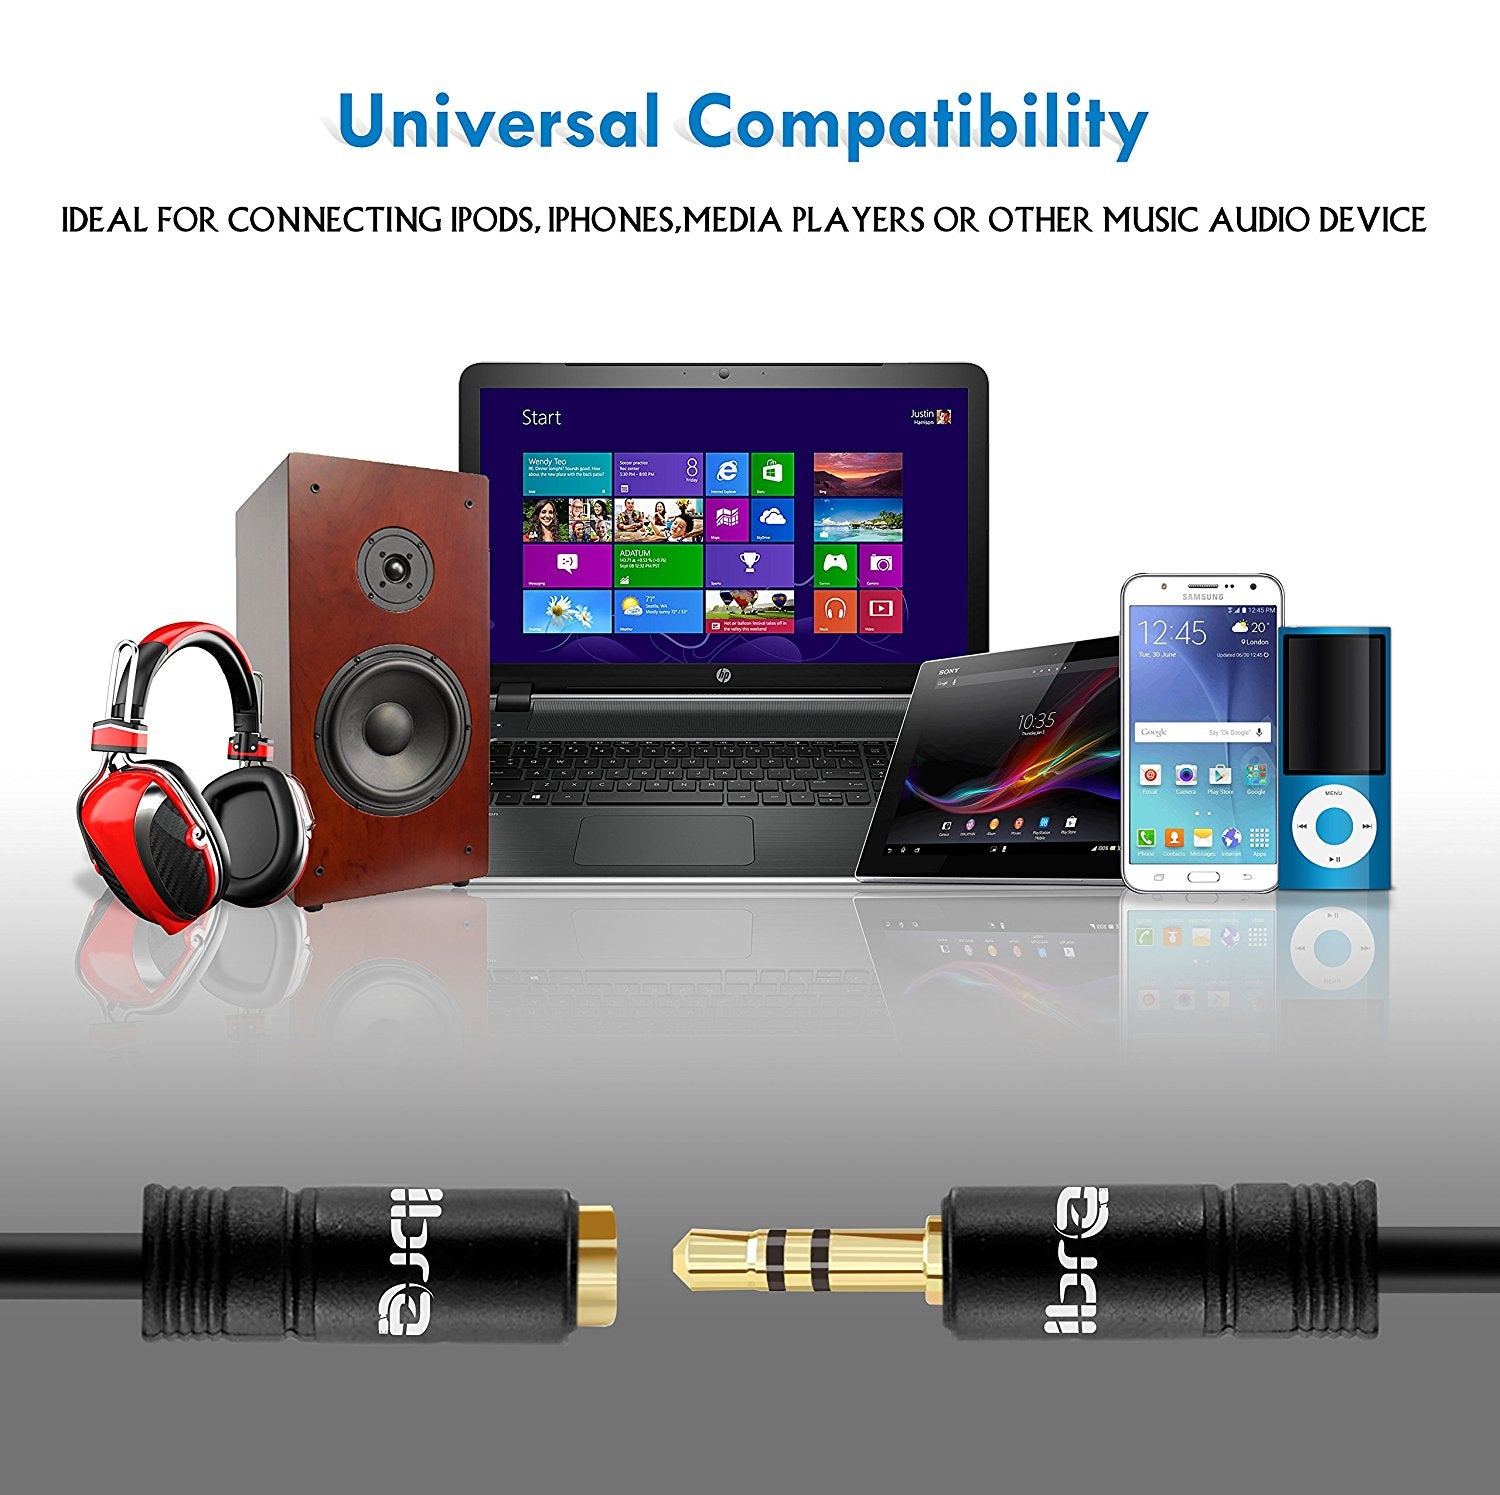 IBRA 0.5M Stereo Jack Extension Cable 3.5mm Male > 3.5mm Female - Black